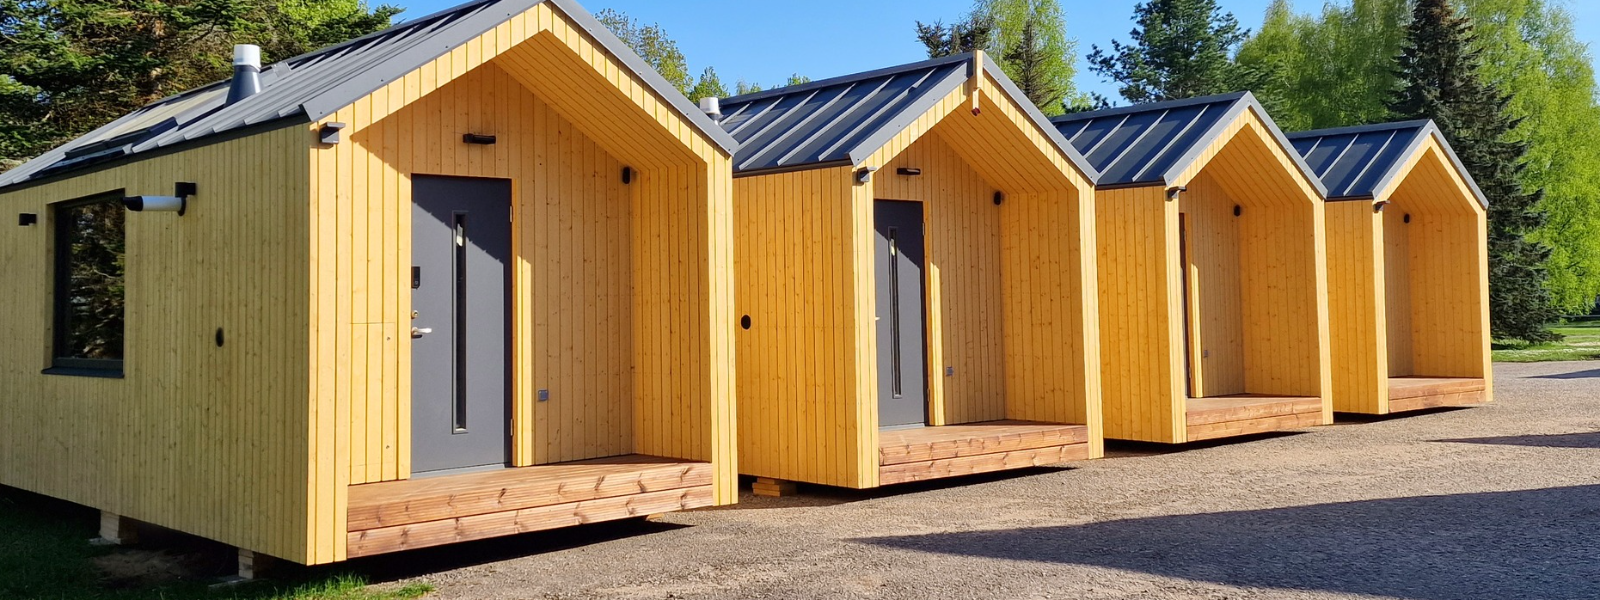 Manufacture of prefabricated wooden buildings (e.g. saunas, summerhouses, houses) or elements thereof in Kanepi vald